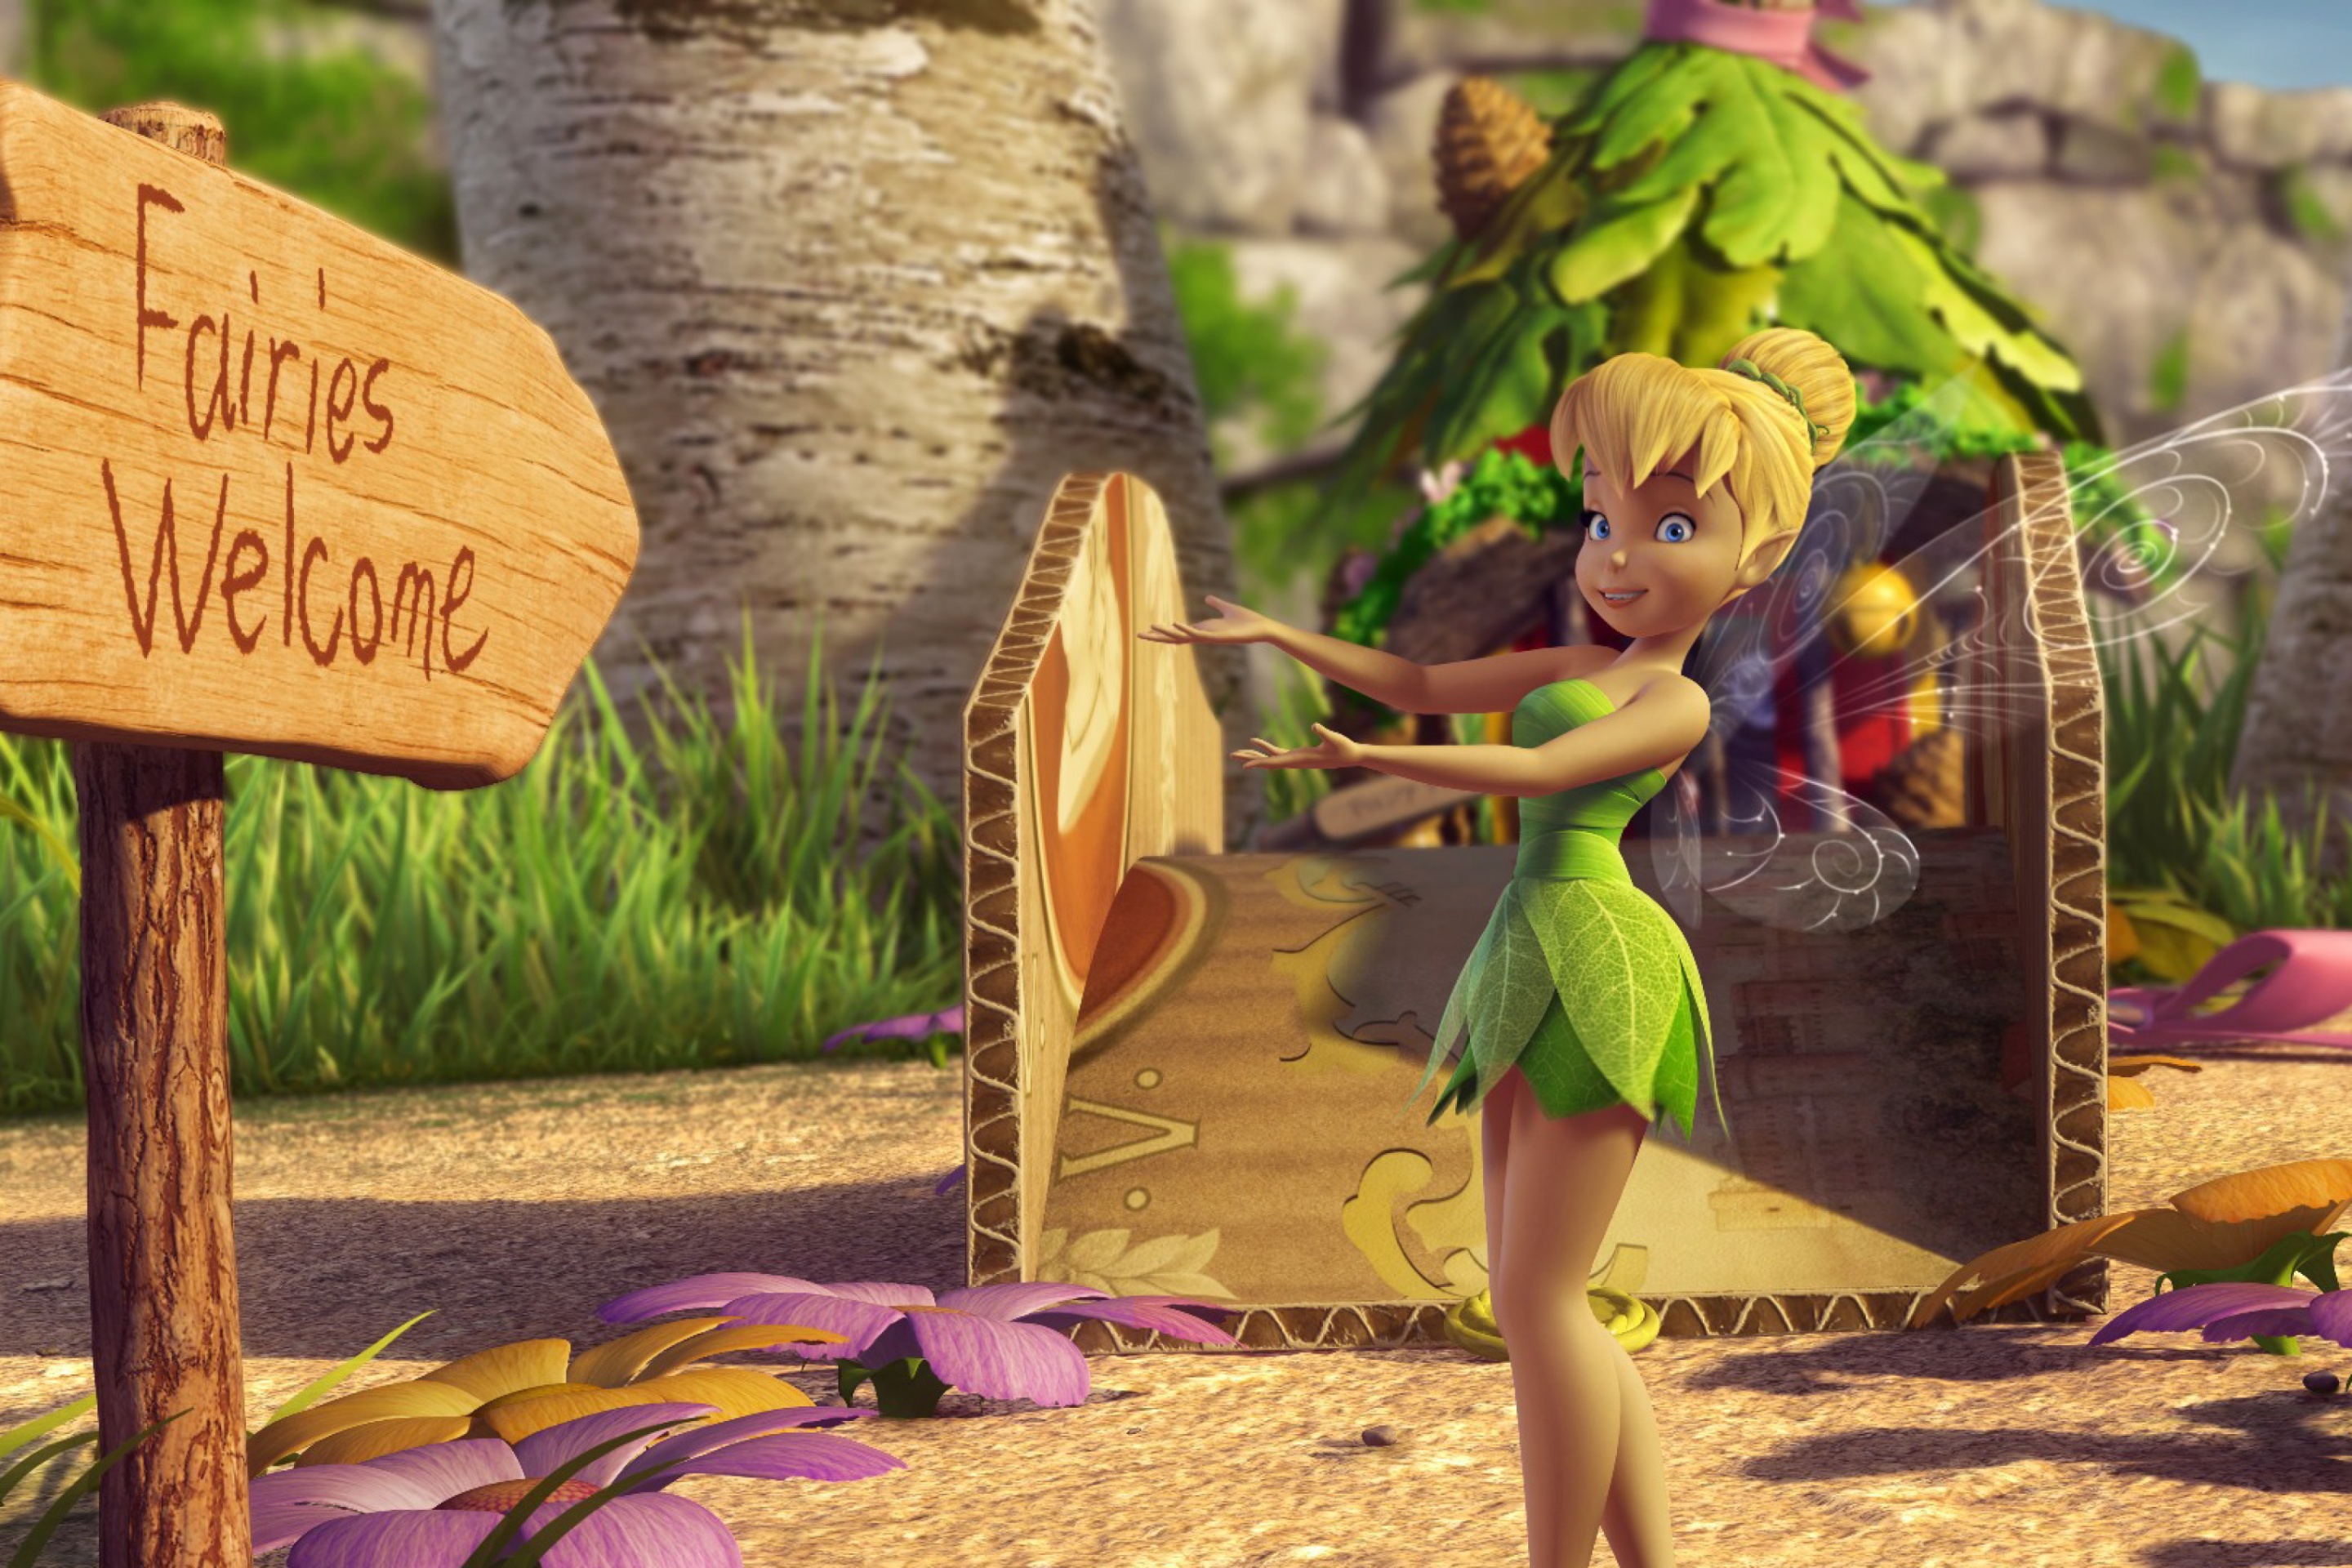 Tinker Bell And The Great Fairy Rescue 2 wallpaper 2880x1920